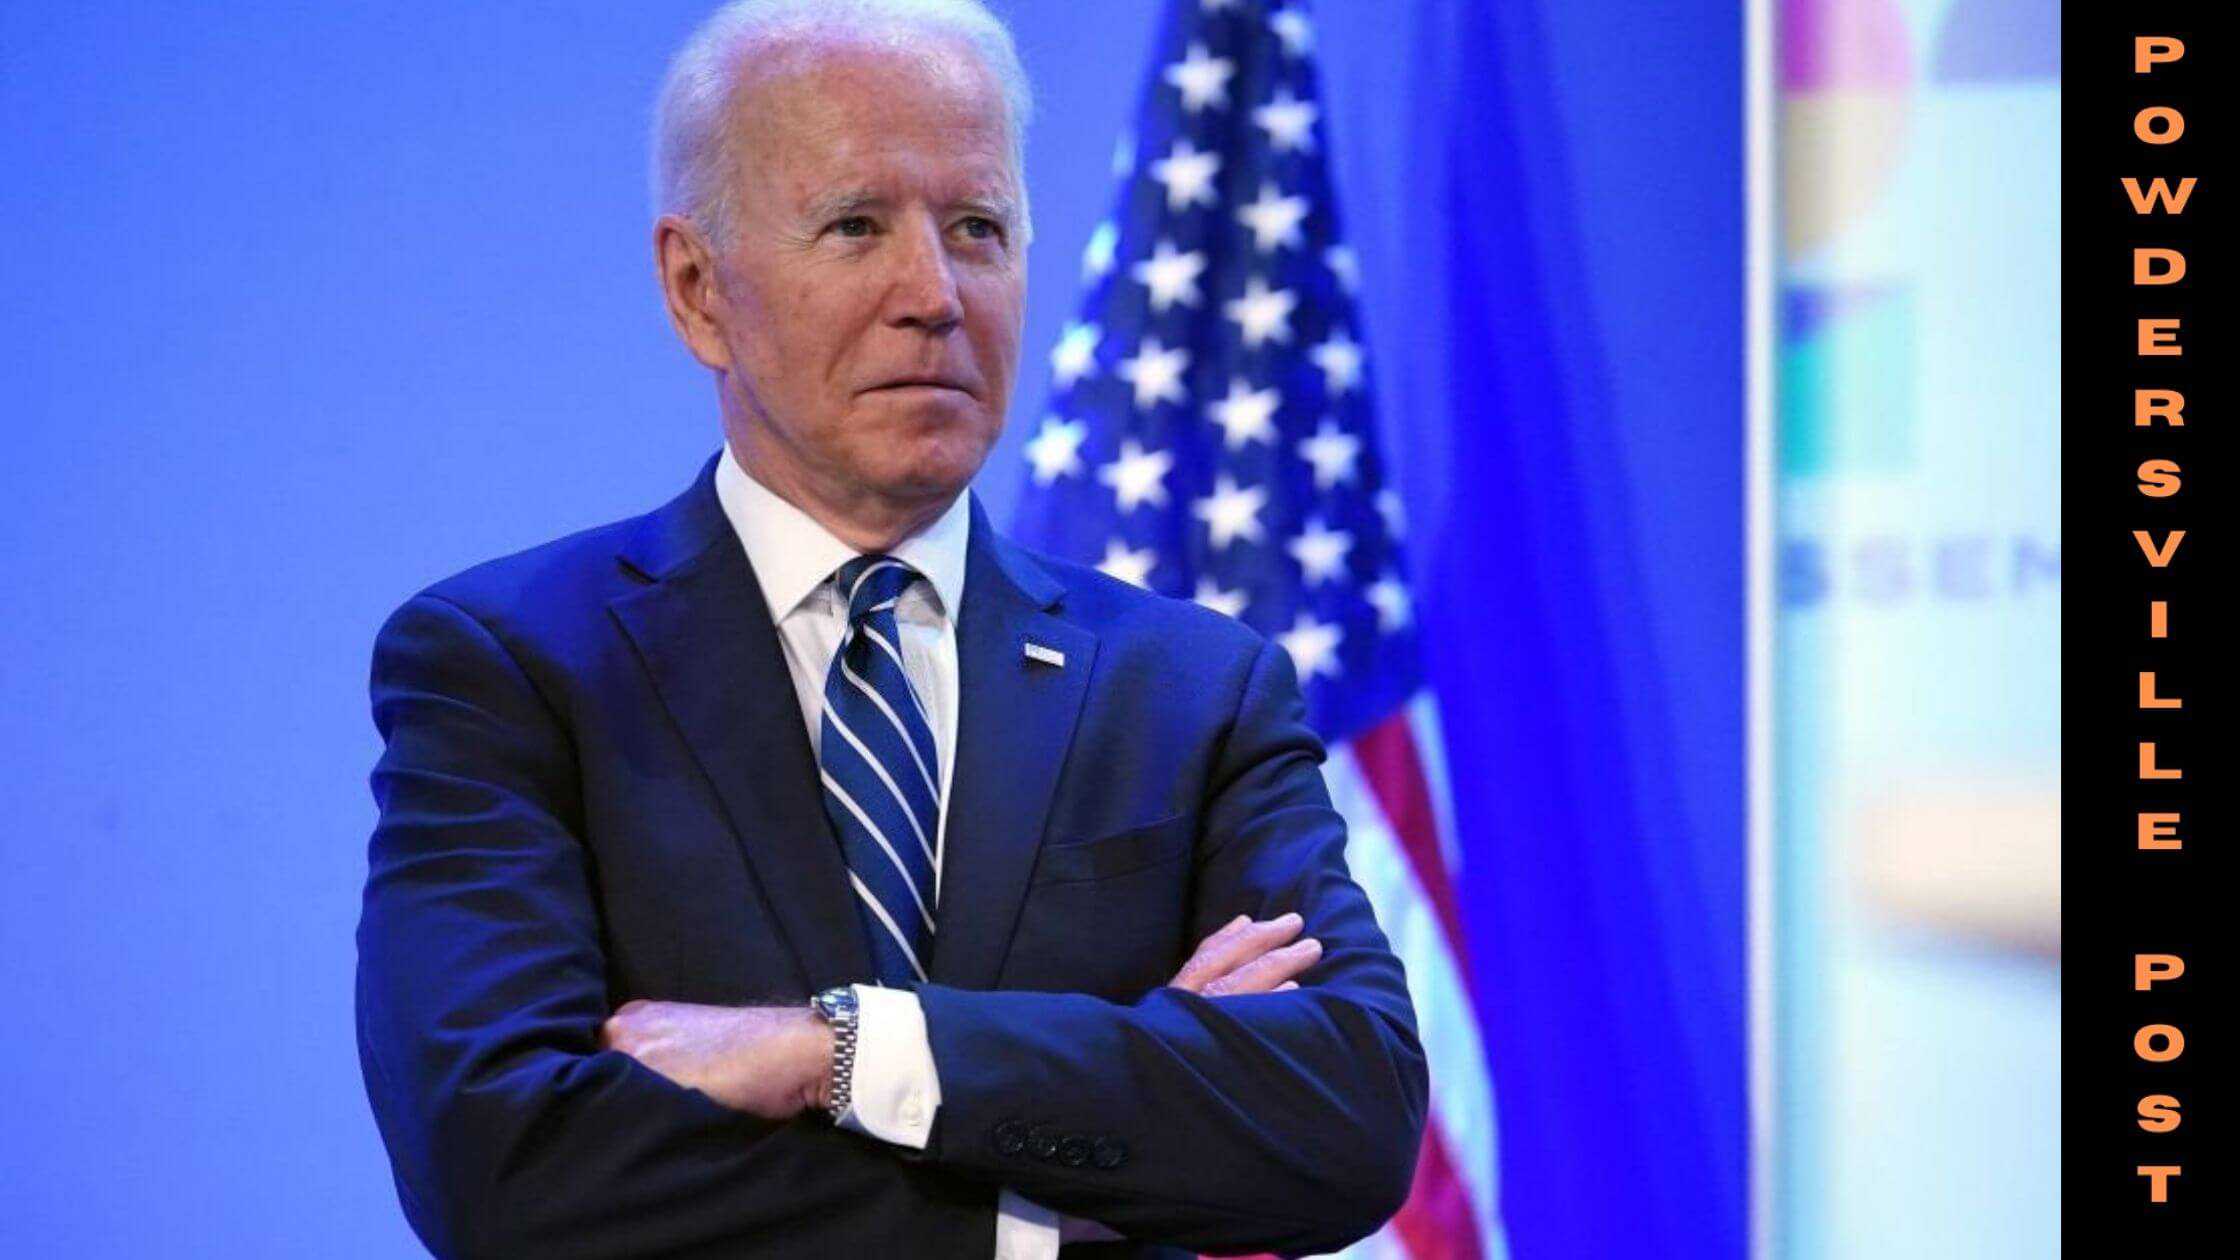 Biden To Address The State Of The Union For The First Time